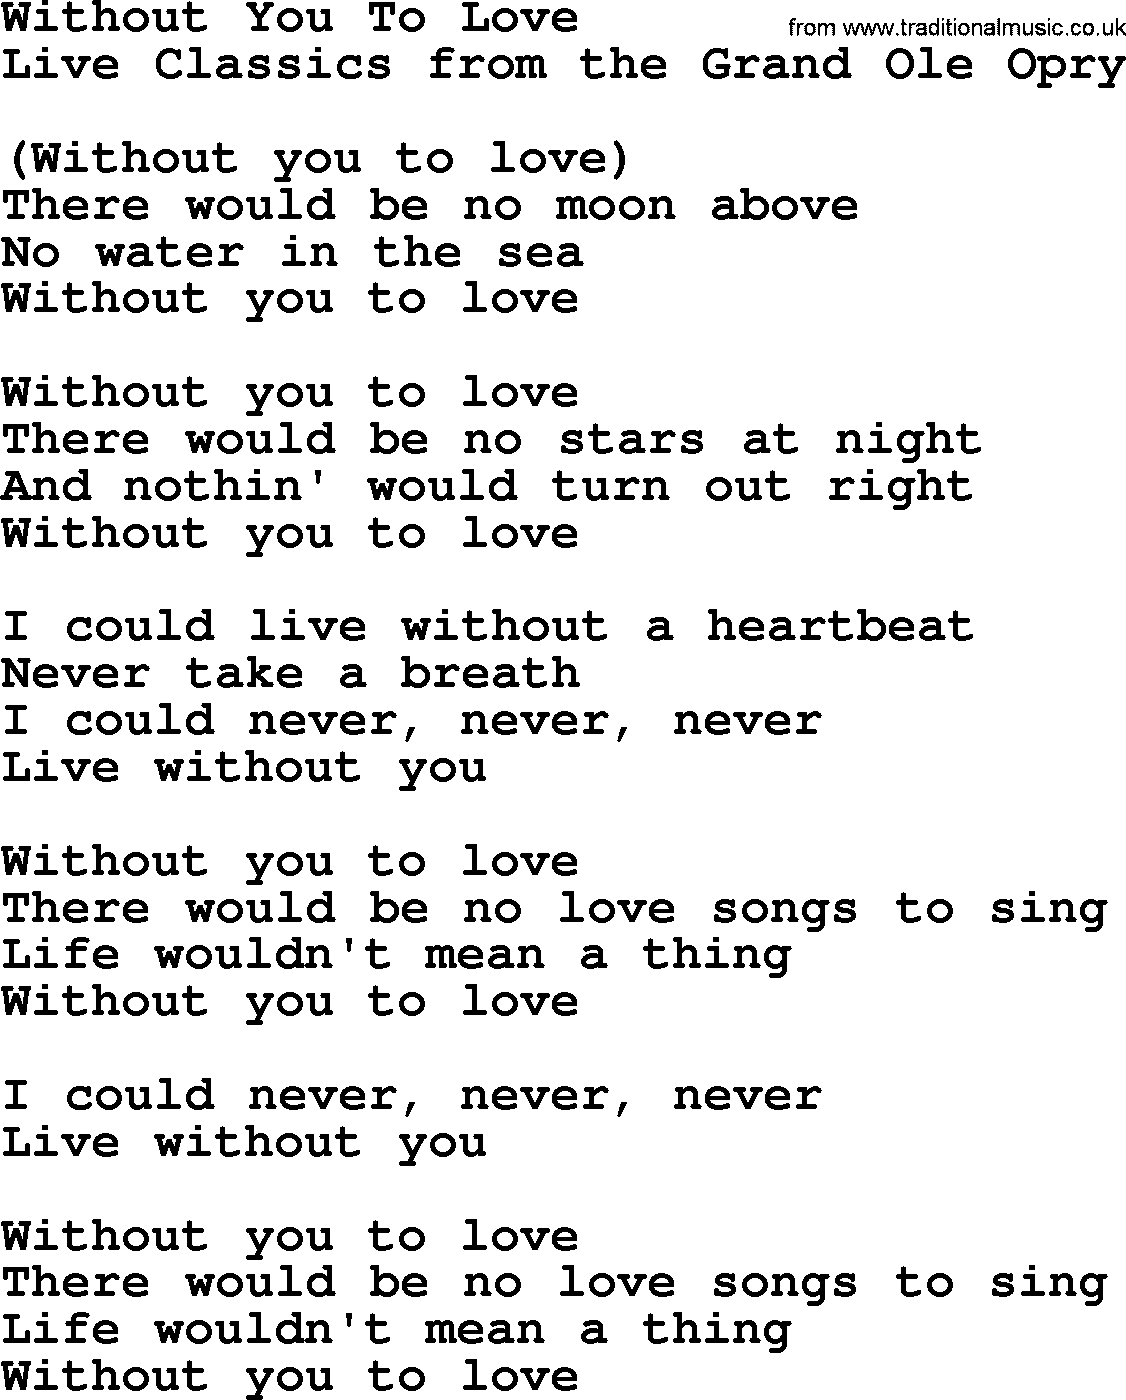 Marty Robbins song: Without You To Love, lyrics